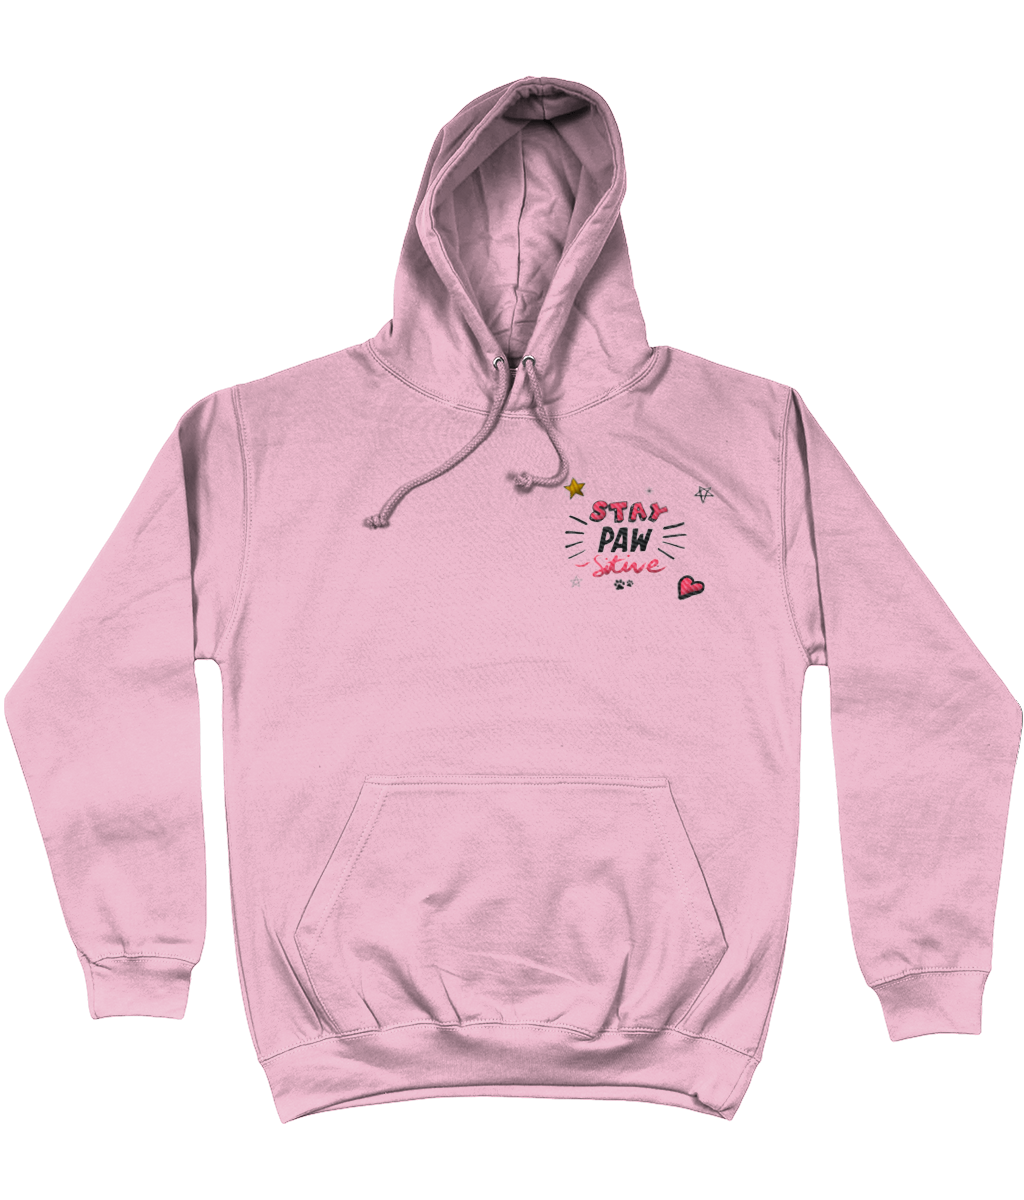 stay paw-sitive embroidered hoodie